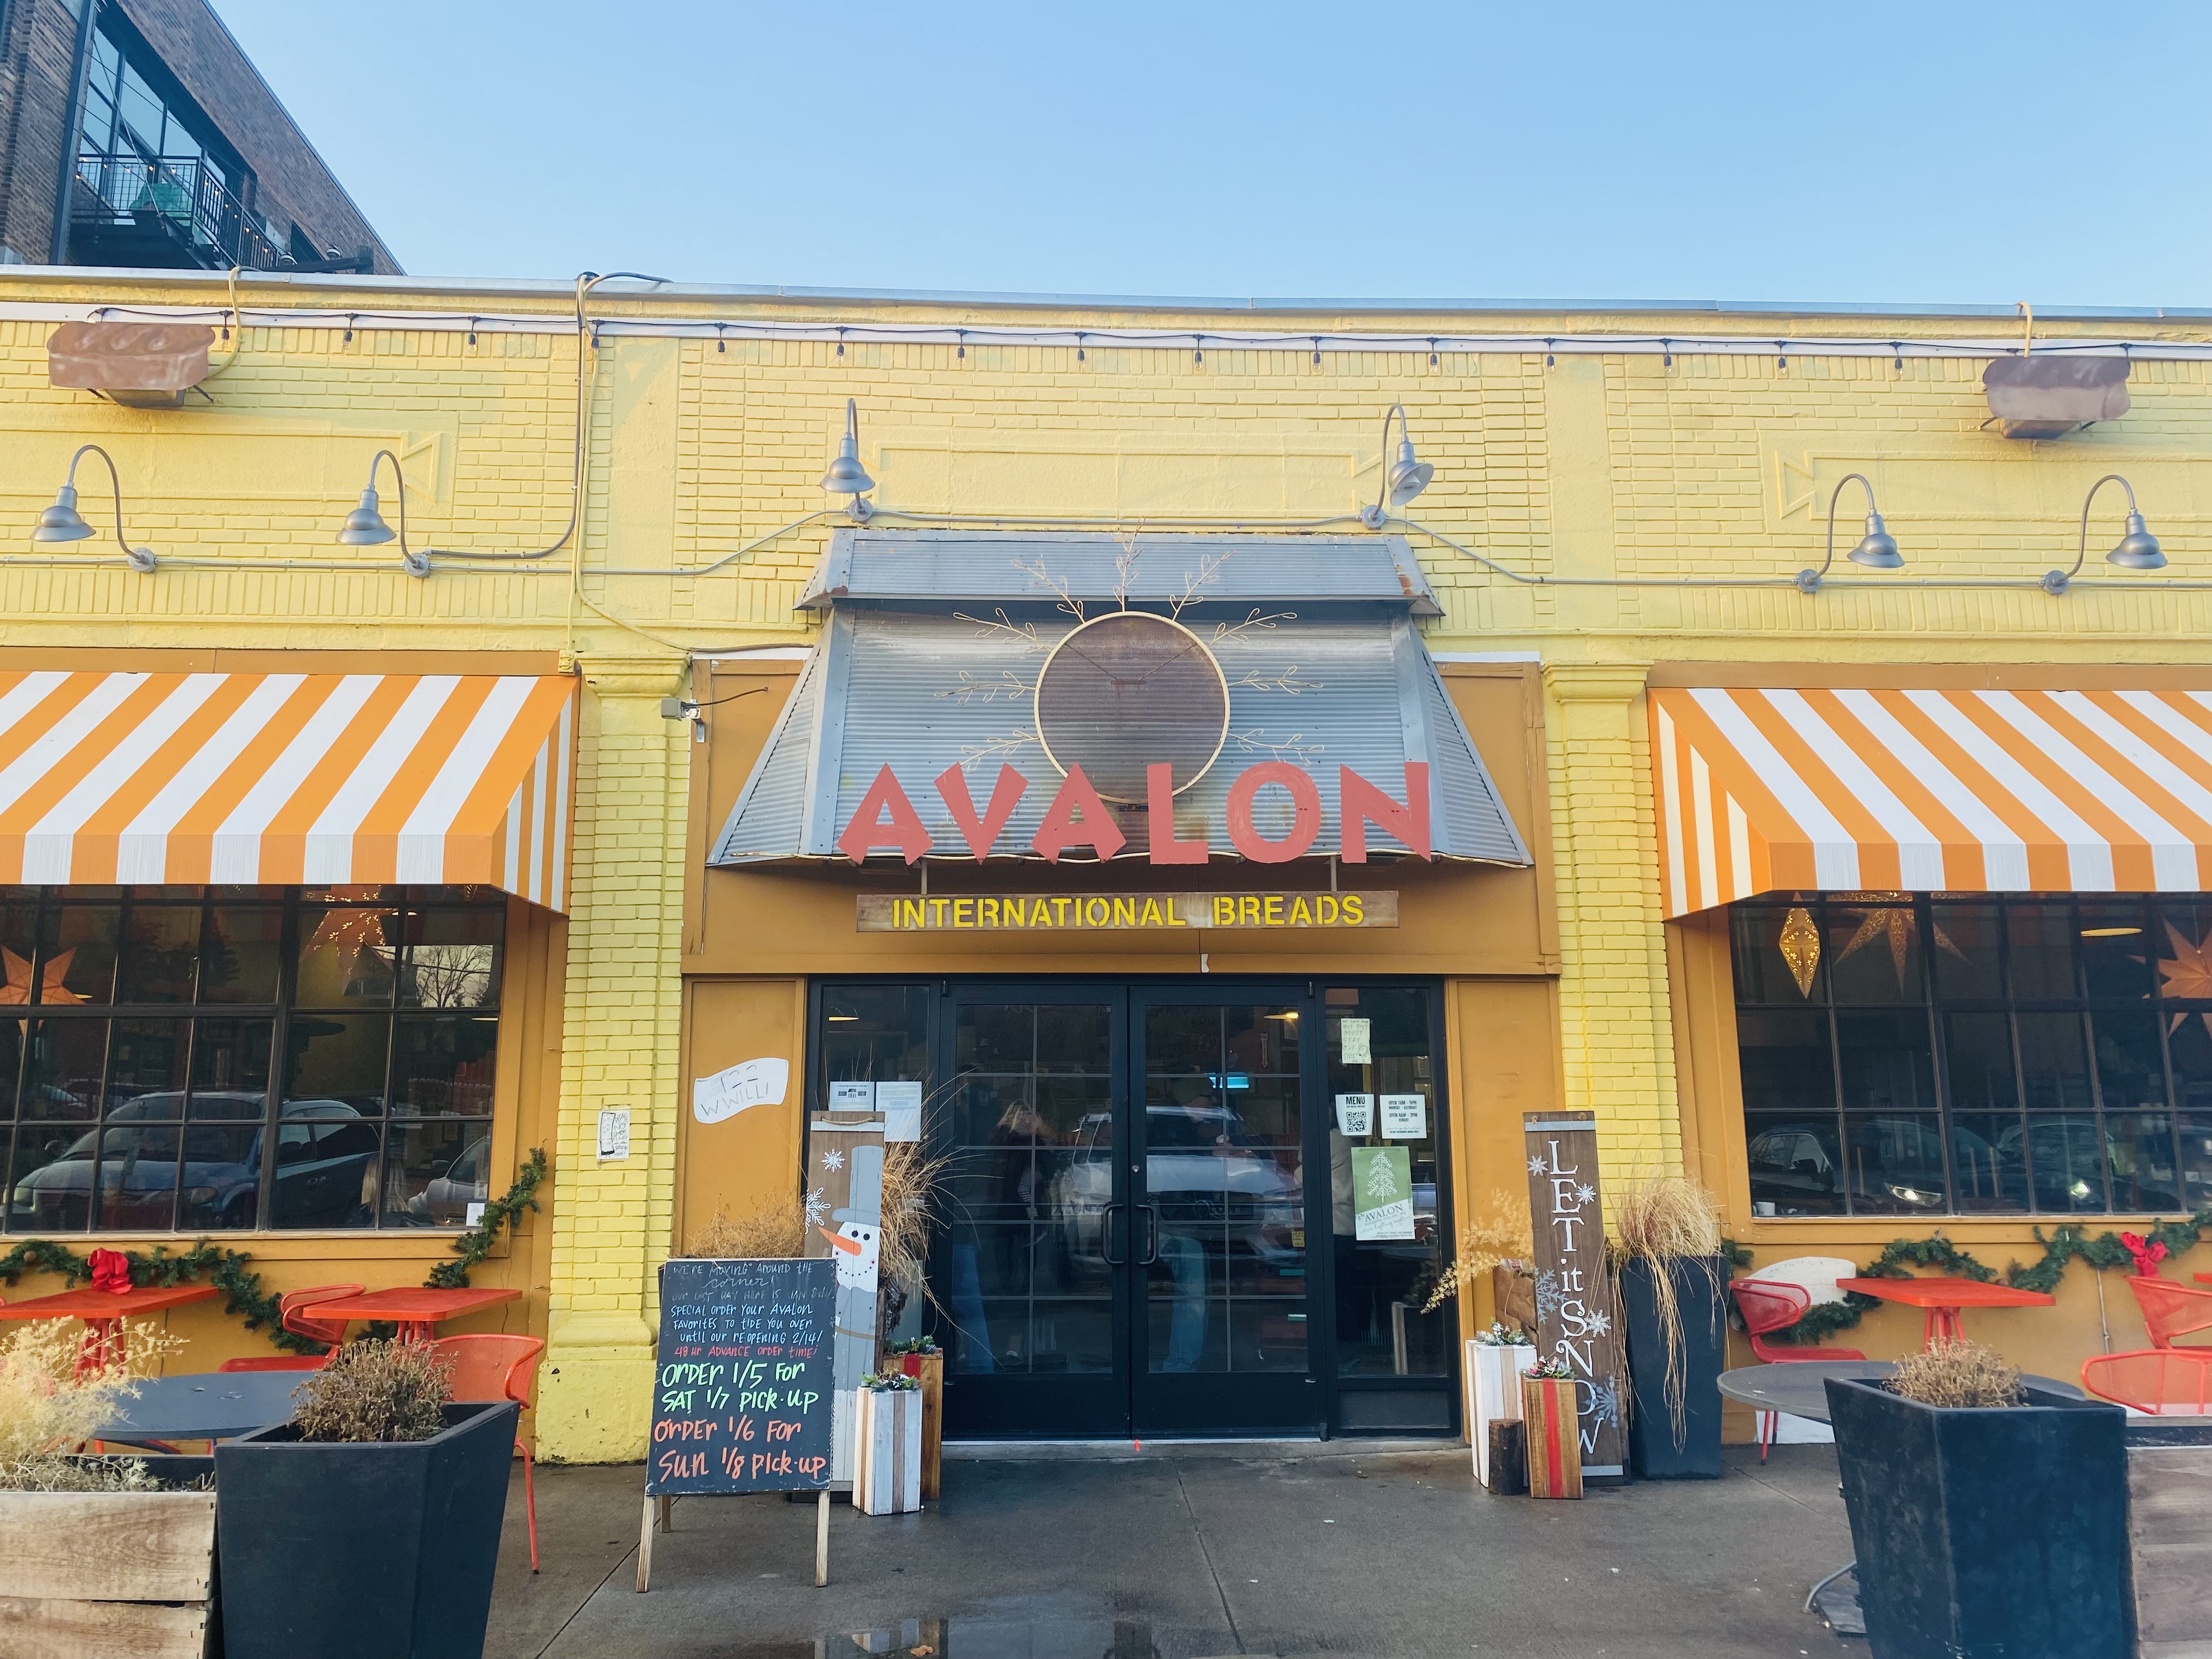 Avalon Bakery in Midtown, Detroit is a brick, single-story building painted yellow with orange and white awnings, and limited orange-colored seating and tables.